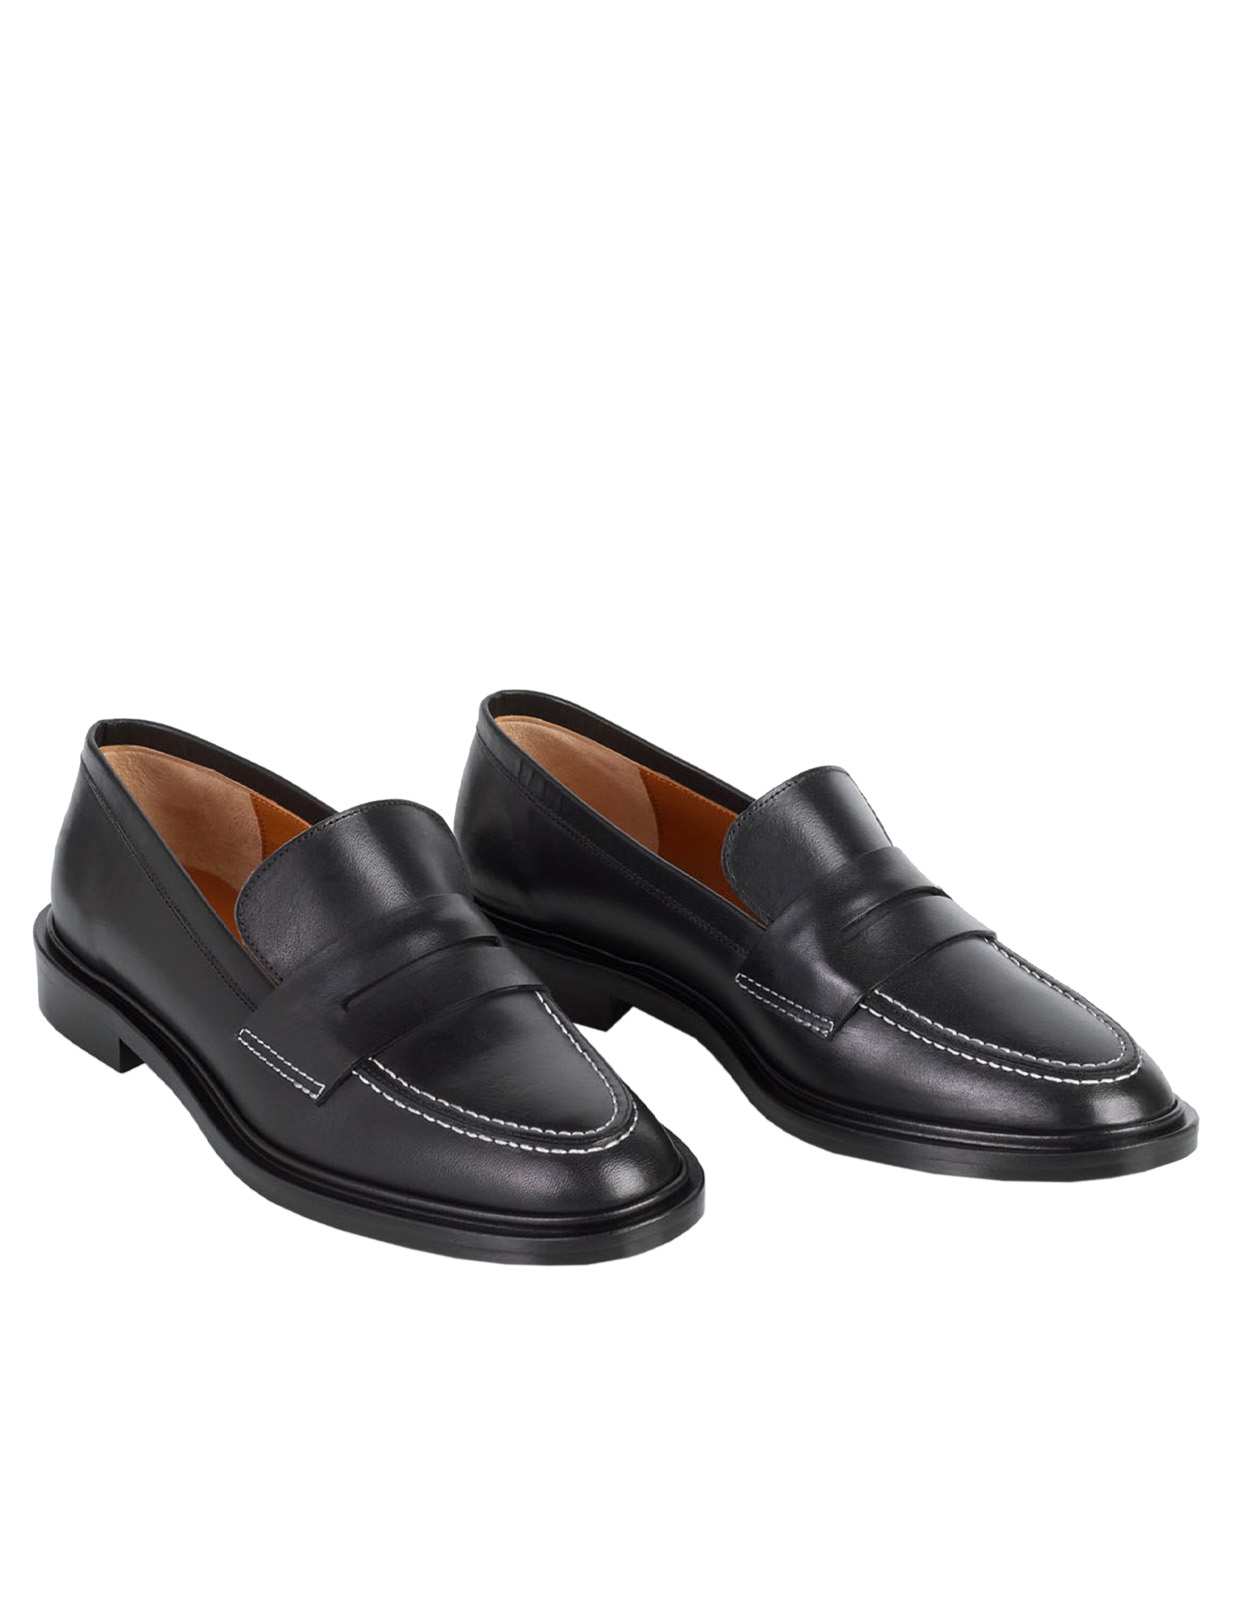 Monti Loafers Black